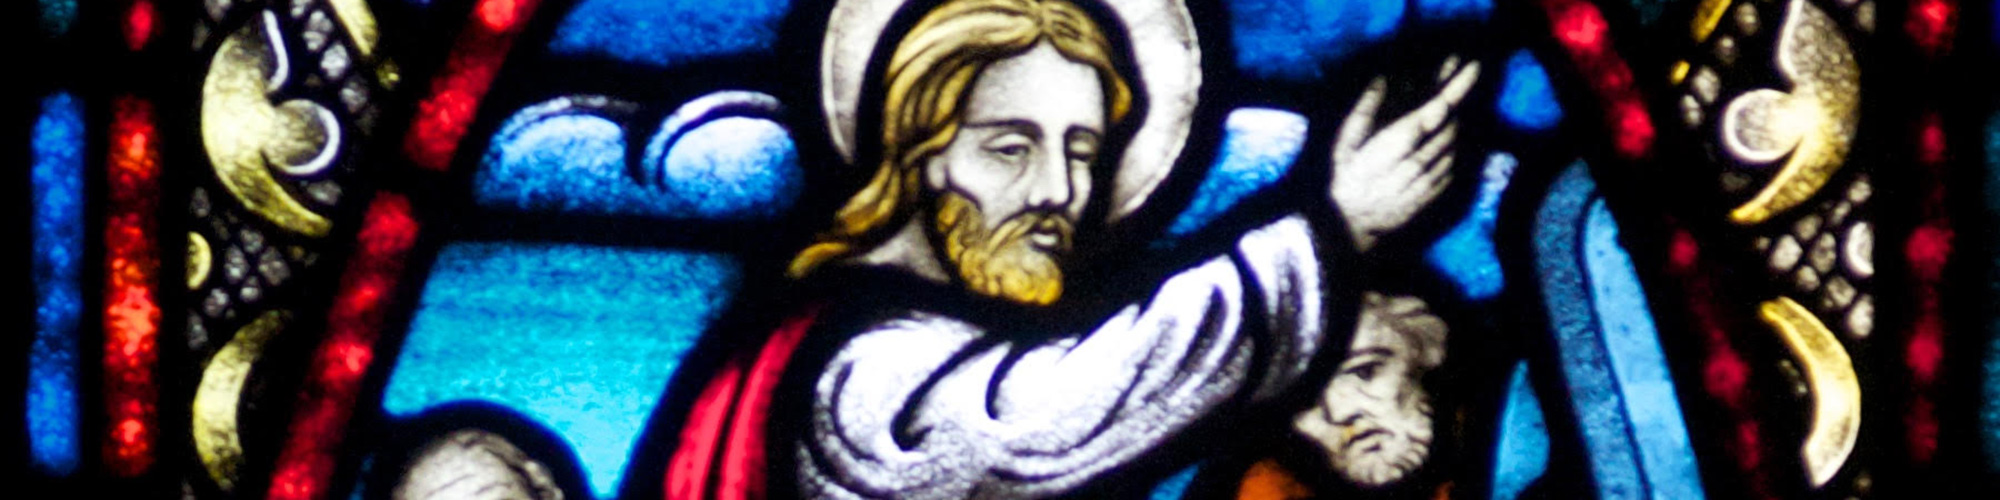 Mount Olive Church Stained Glass Window